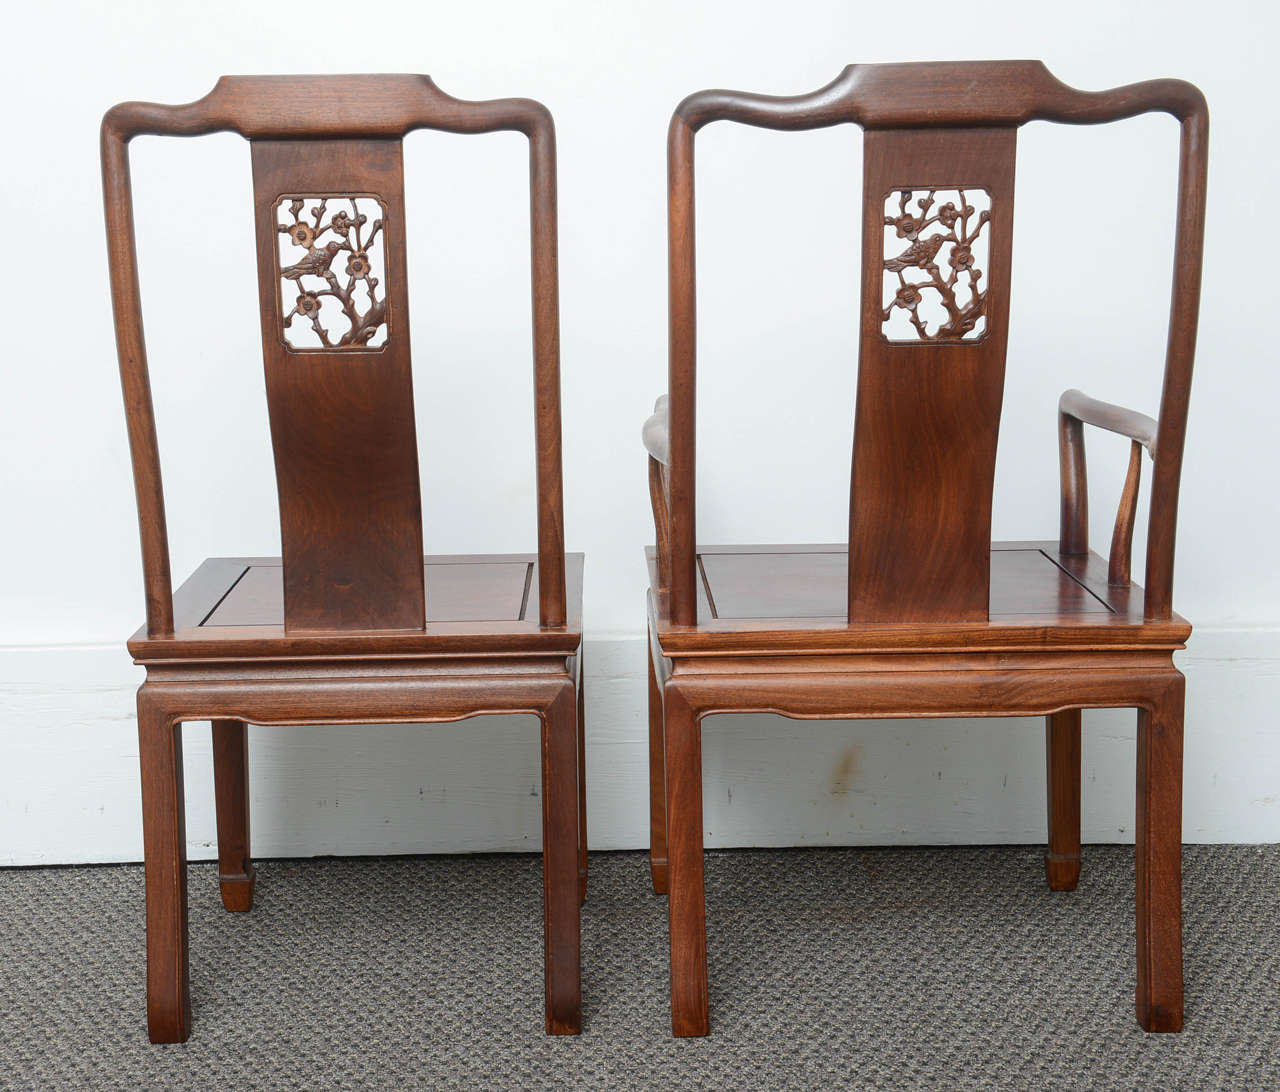 20th Century Set of Eight Vintage Dining Chairs in the Asian Antique Style